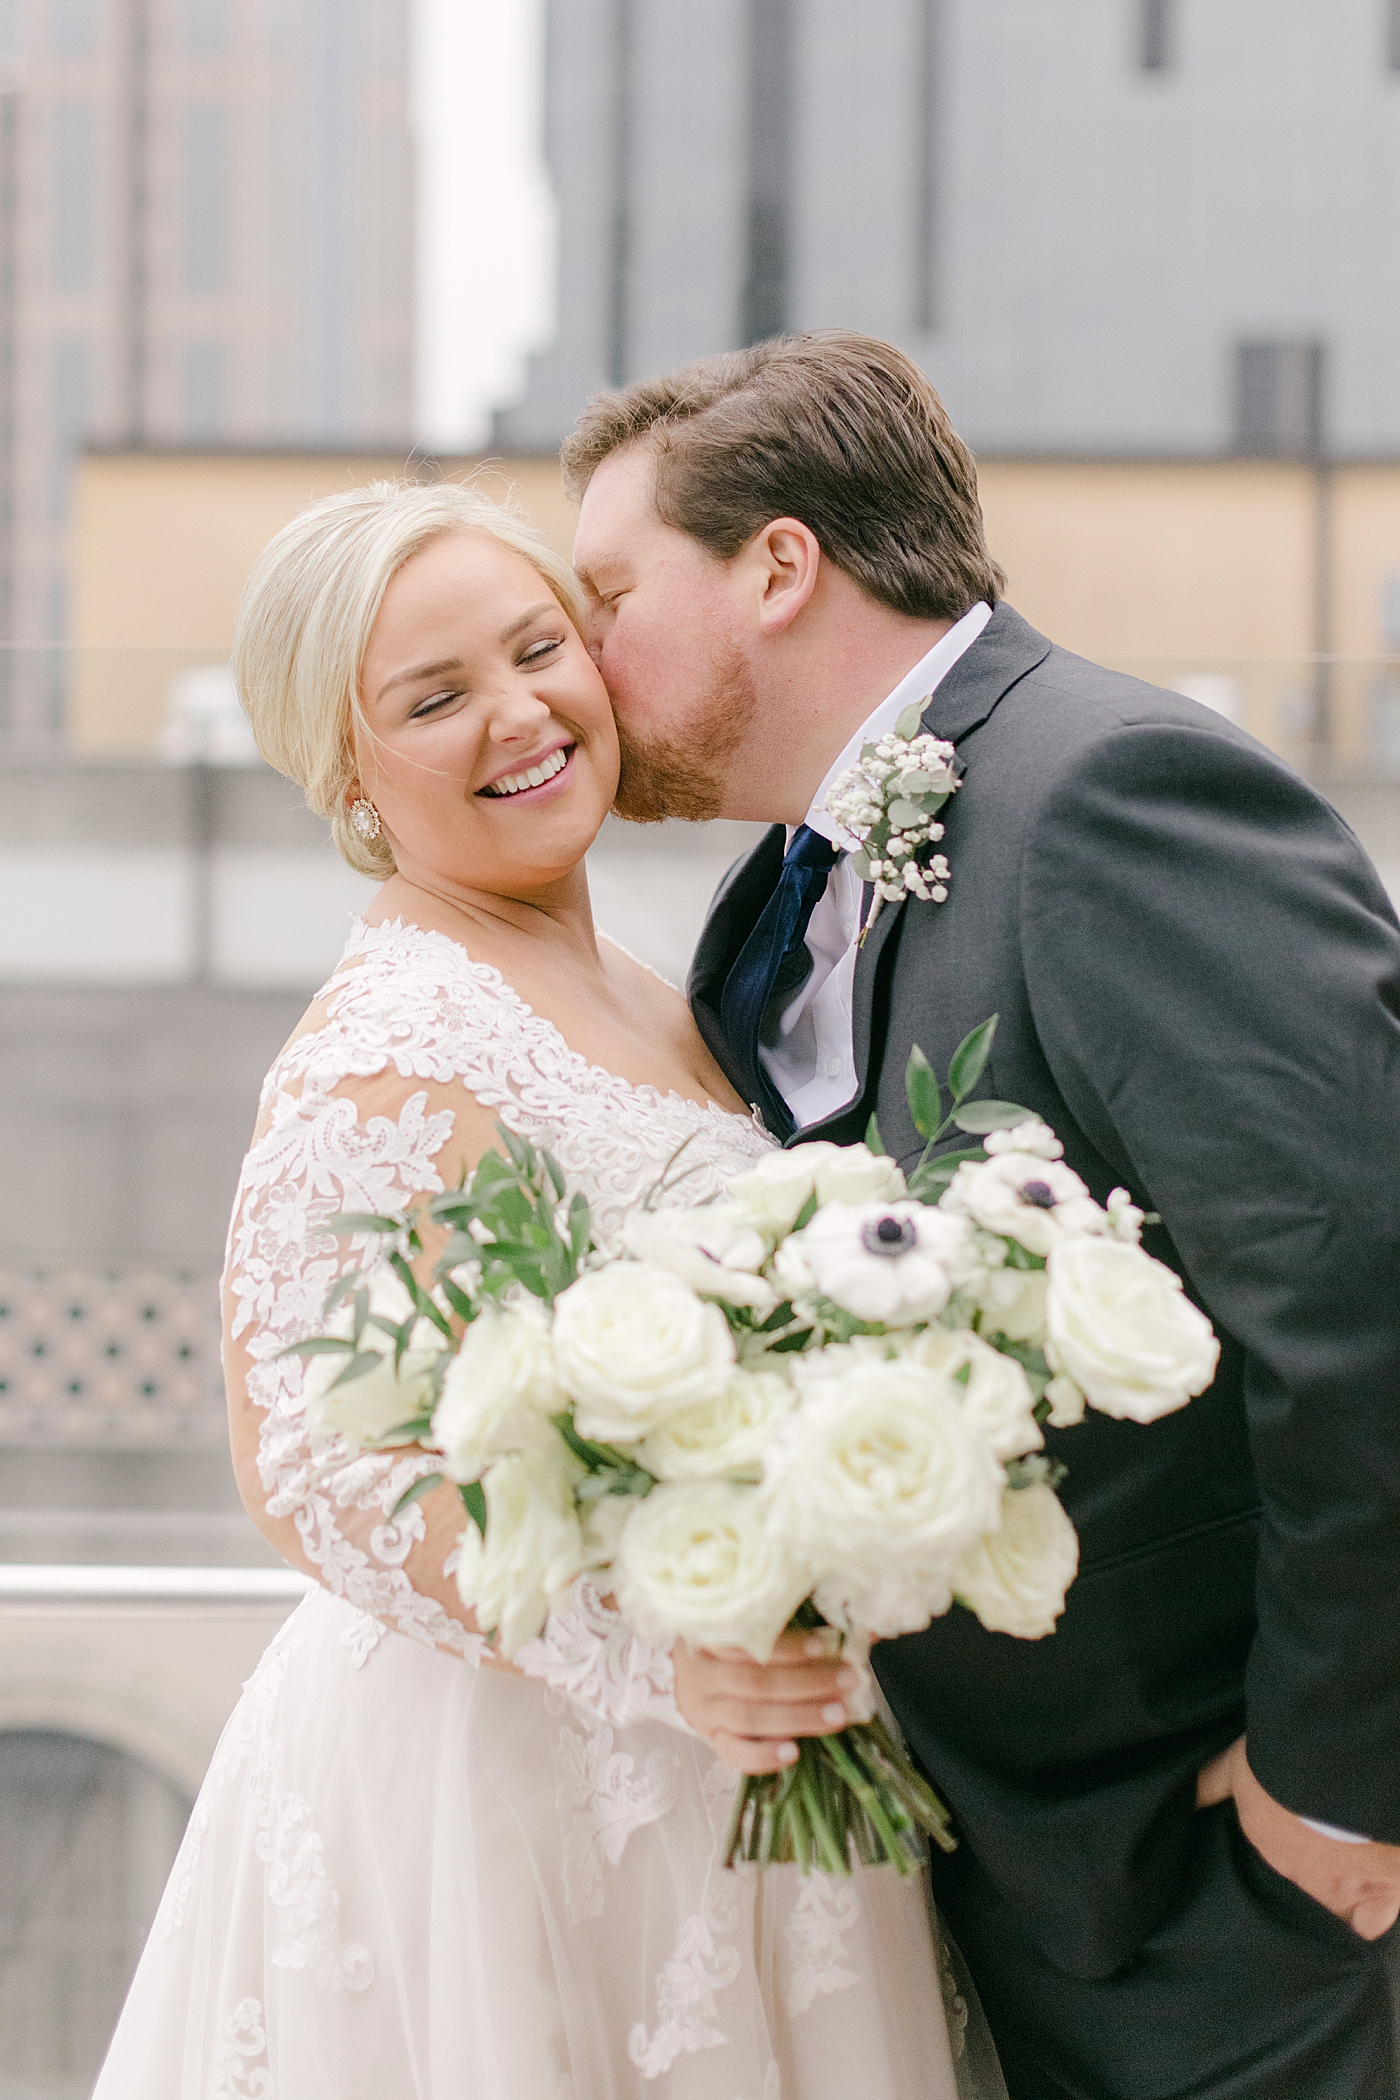 Groom kissing bride on the cheek during Noelle, Nashville Wedding | Photo by Hope Helmuth Photography